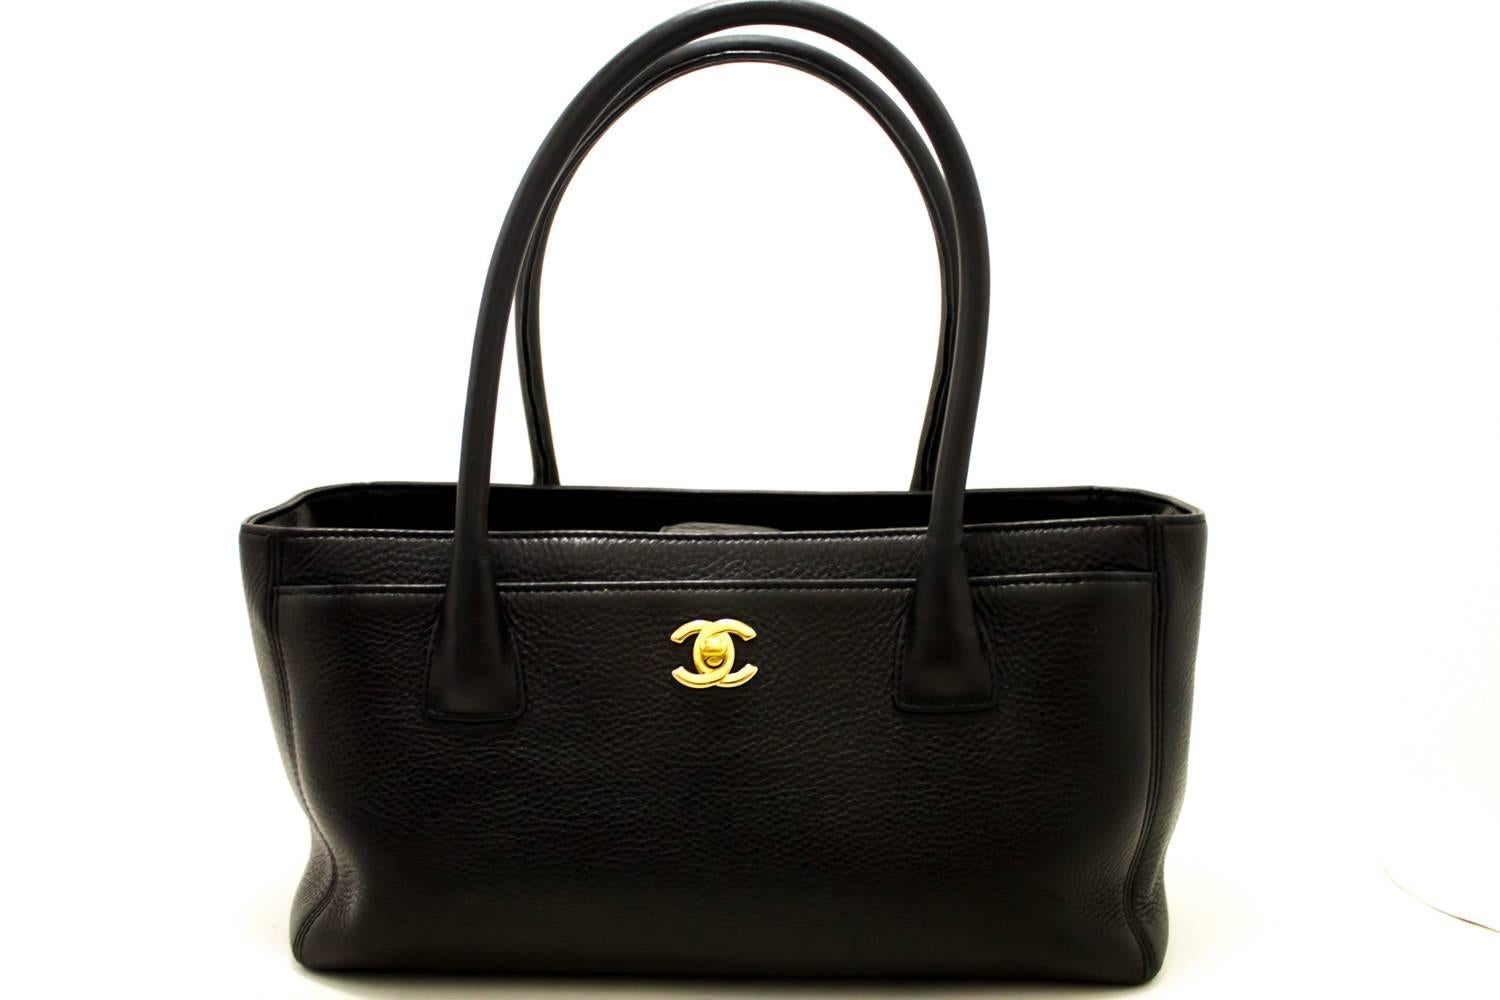 An authentic CHANEL Executive Tote 2014 Caviar Shoulder Bag Black Gold Leather The outside material is r leather.
Conditions & Ratings
Outside material: Soft caviar leather
Color: Black
Hardware and chain: Gold-tone
Made in Italy
Serial sticker: